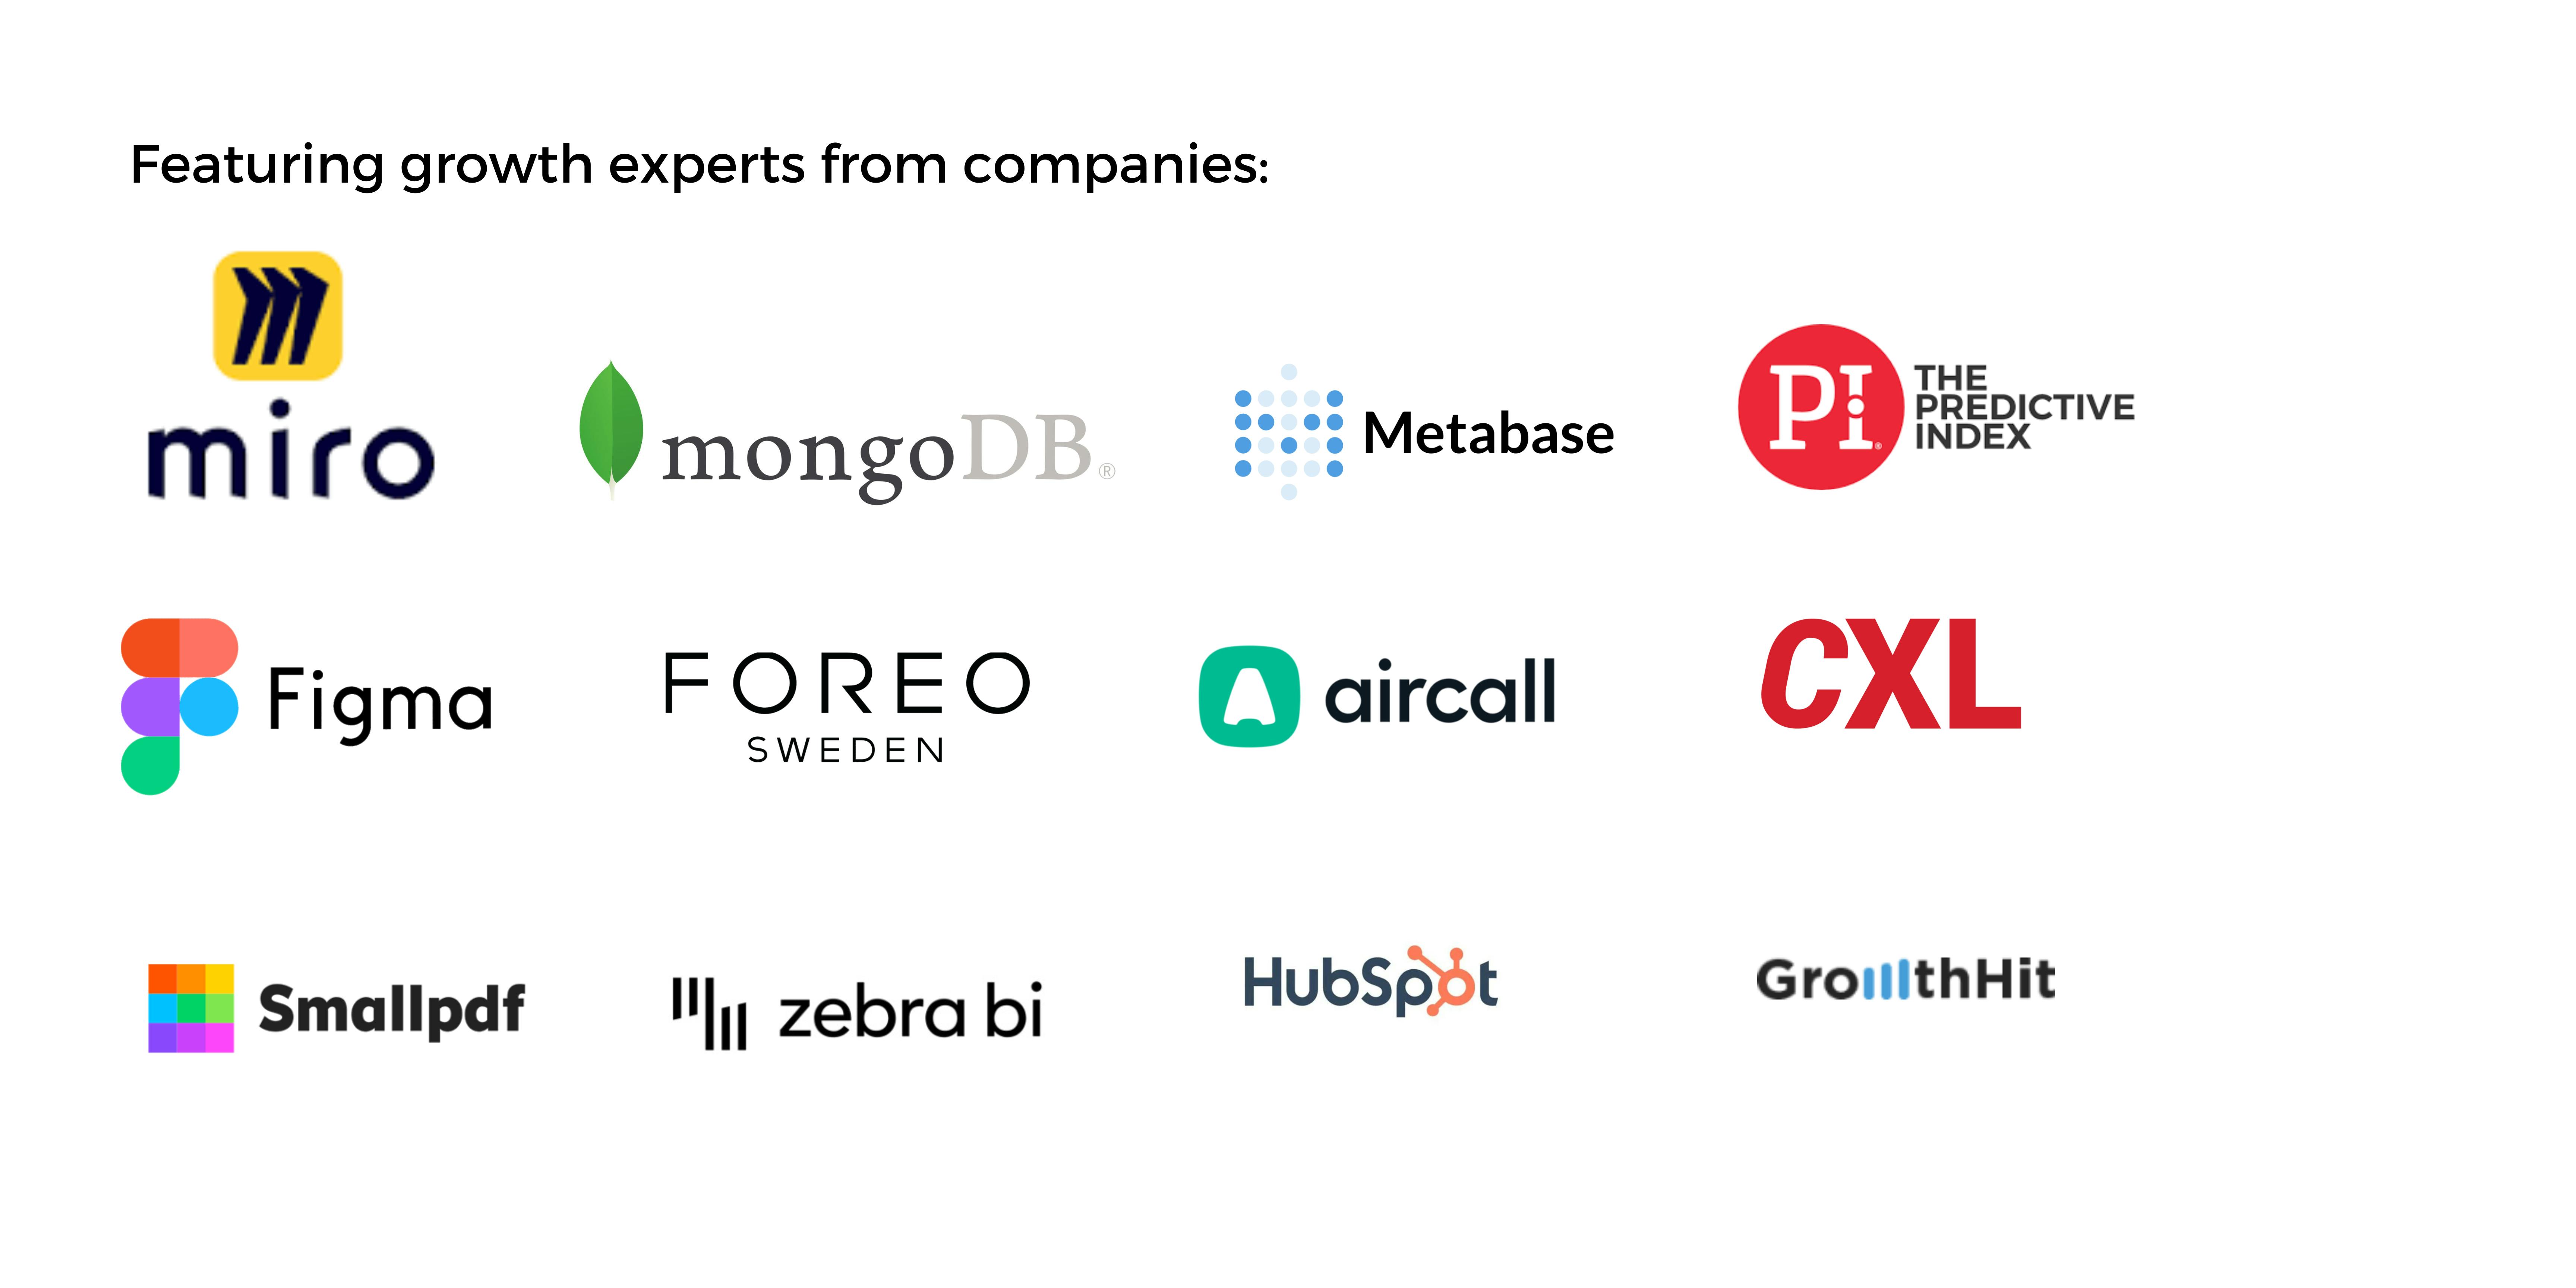 Featuring growth experts from Miro, Figma, Smallpdf, mongoDB, Foreo, Zebra BI, Metabase, Aircall, Hubspot, CXL, GrowthHit